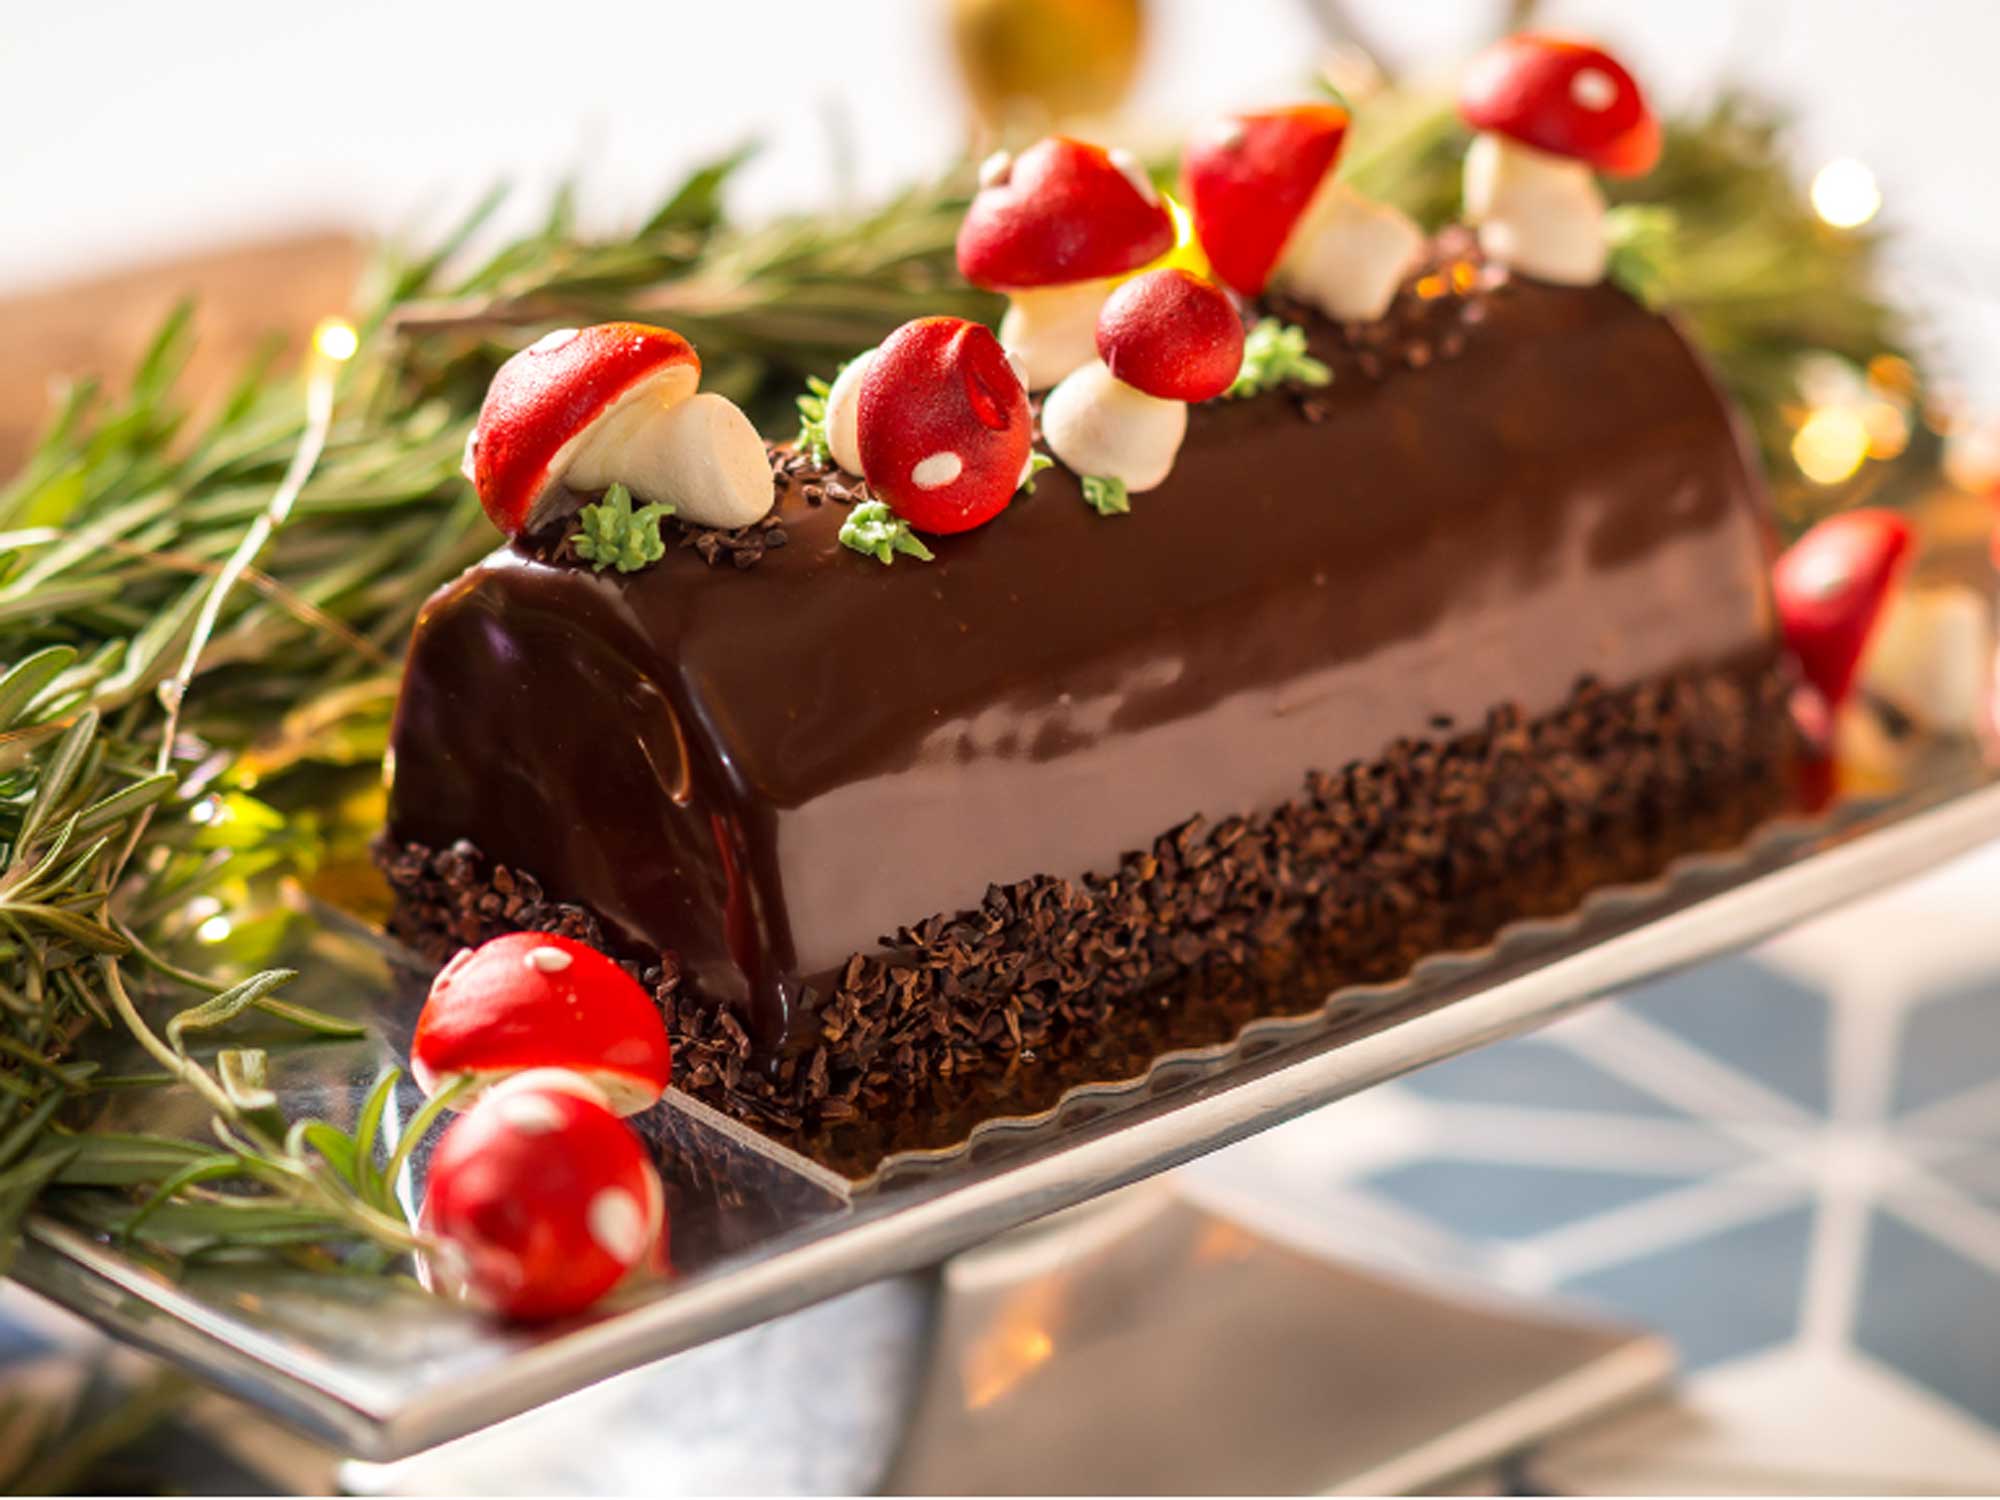 We Can't Stop Gawking at These Gorgeous Bûches de Noël